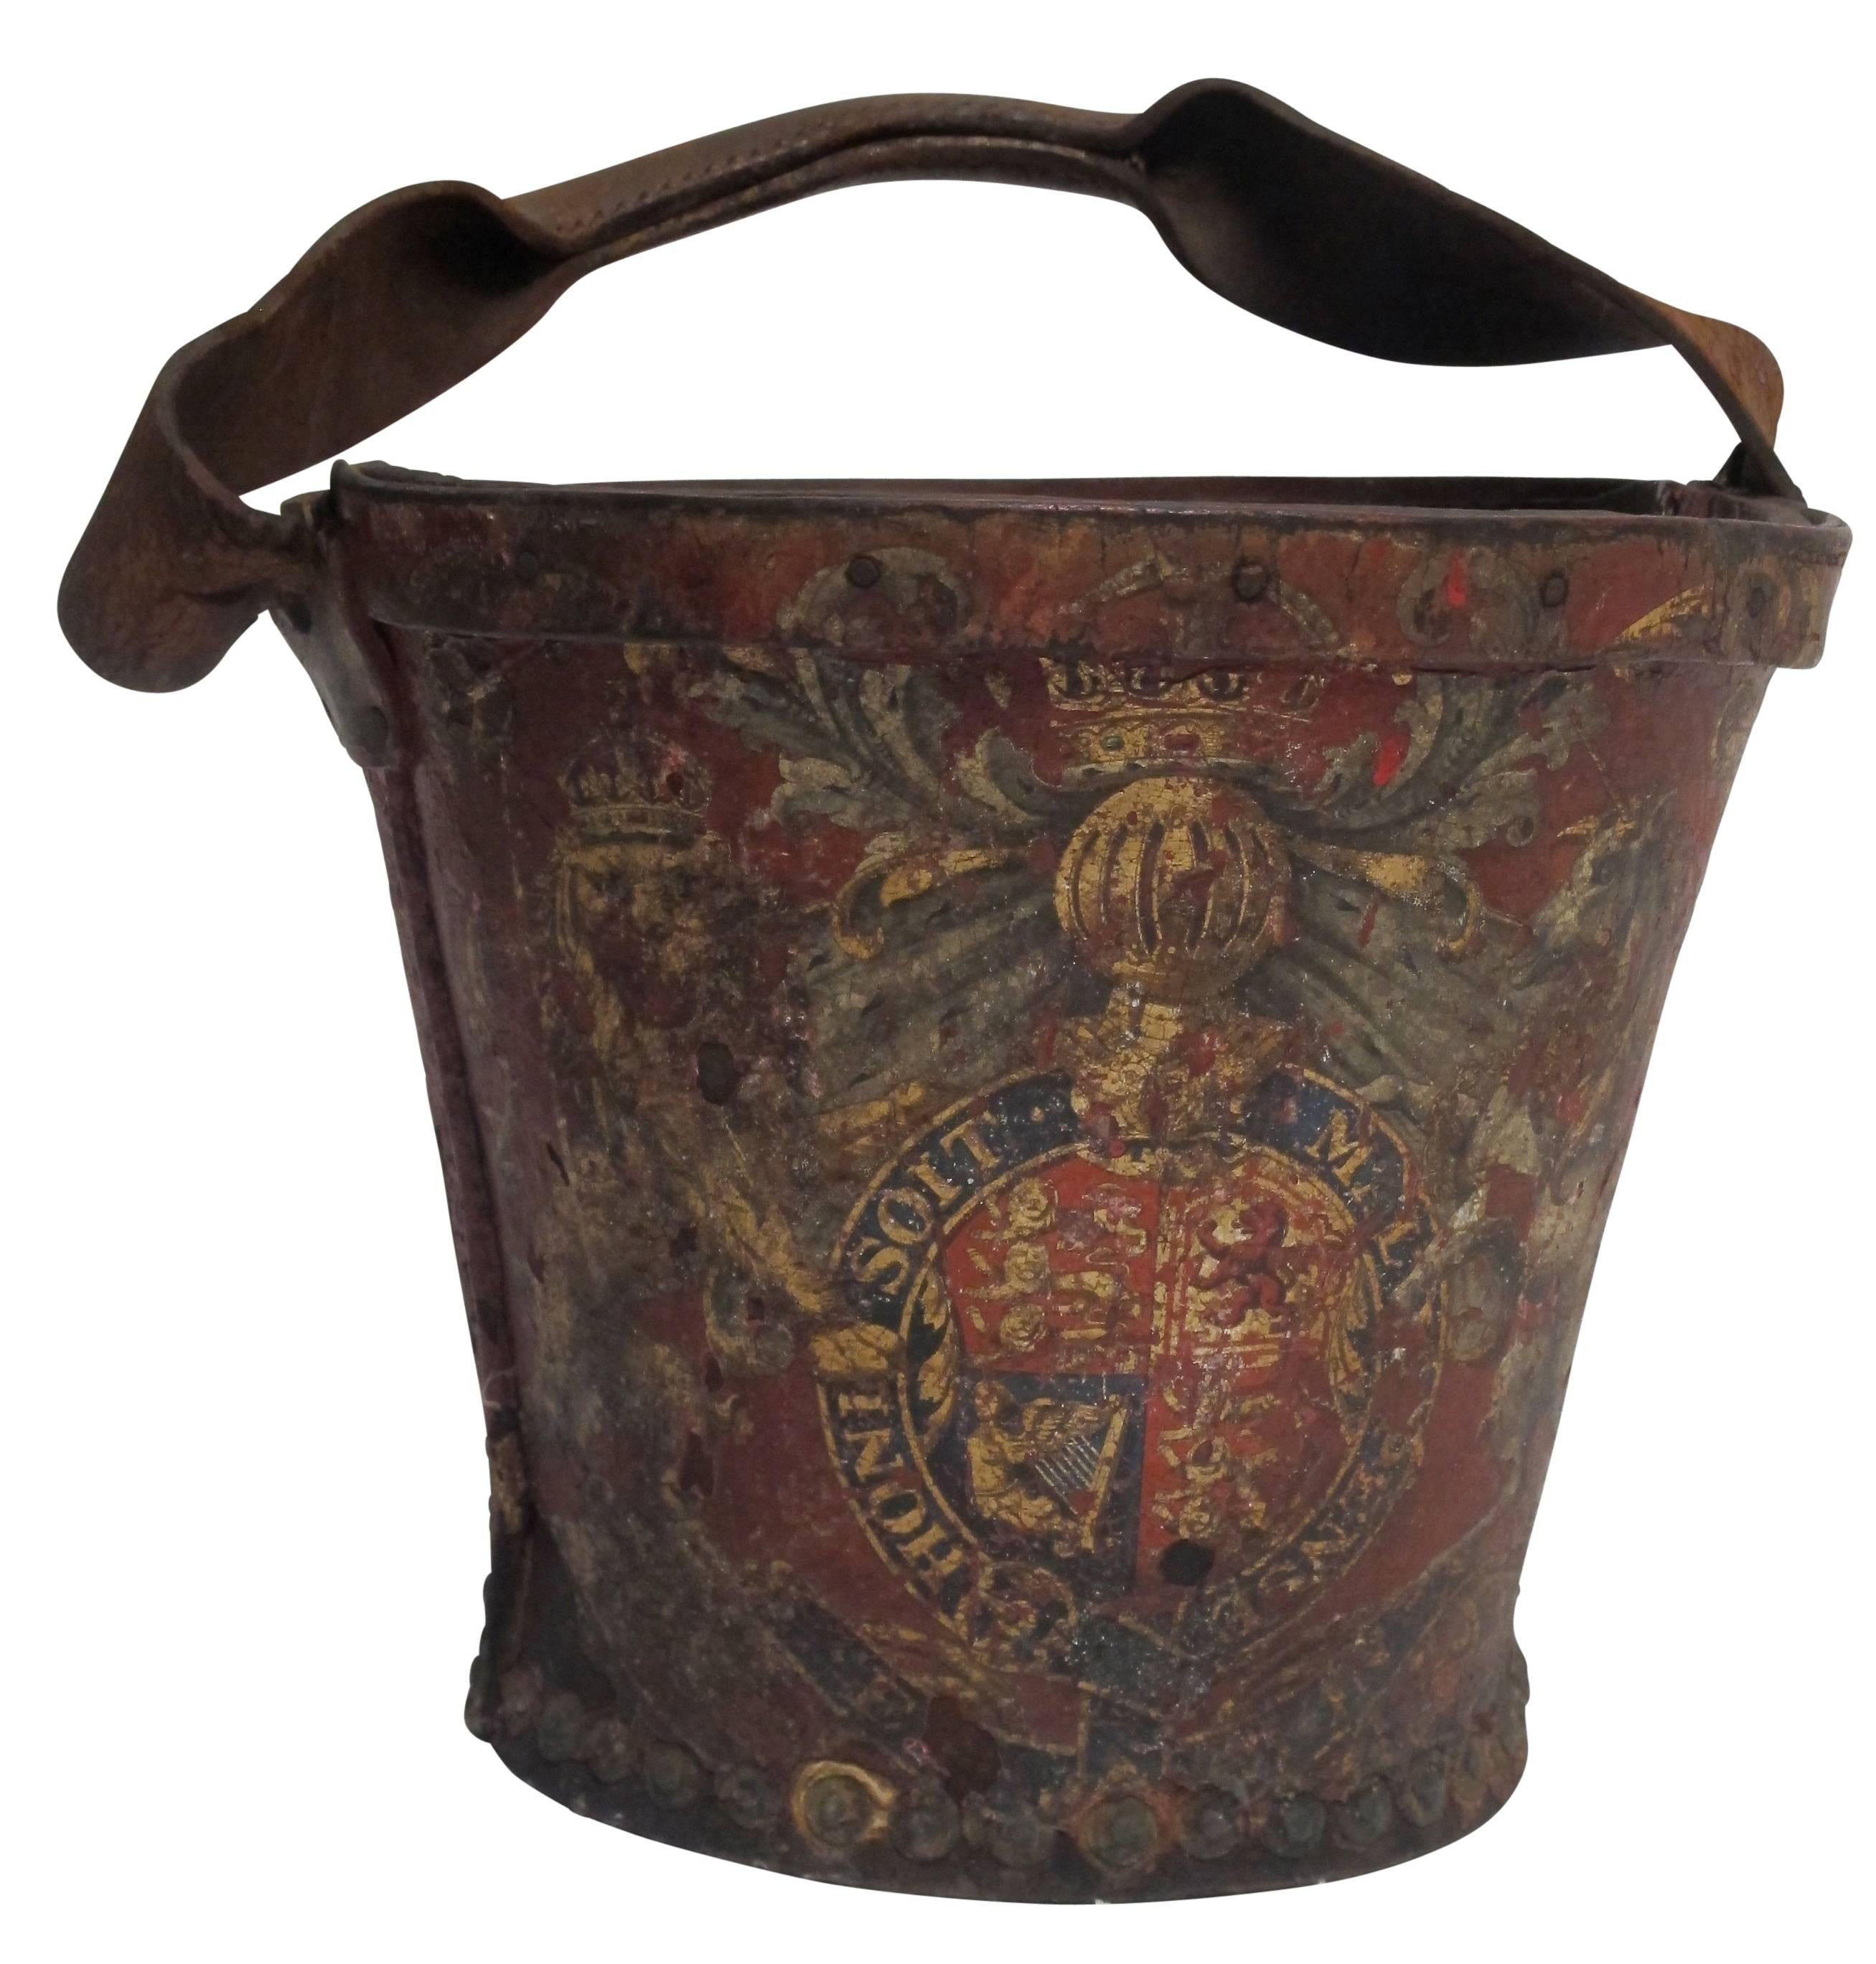 Antique red leather fire bucket with elaborate hand-painted British insignia, body having a circular tapered form, England, early 19th century.